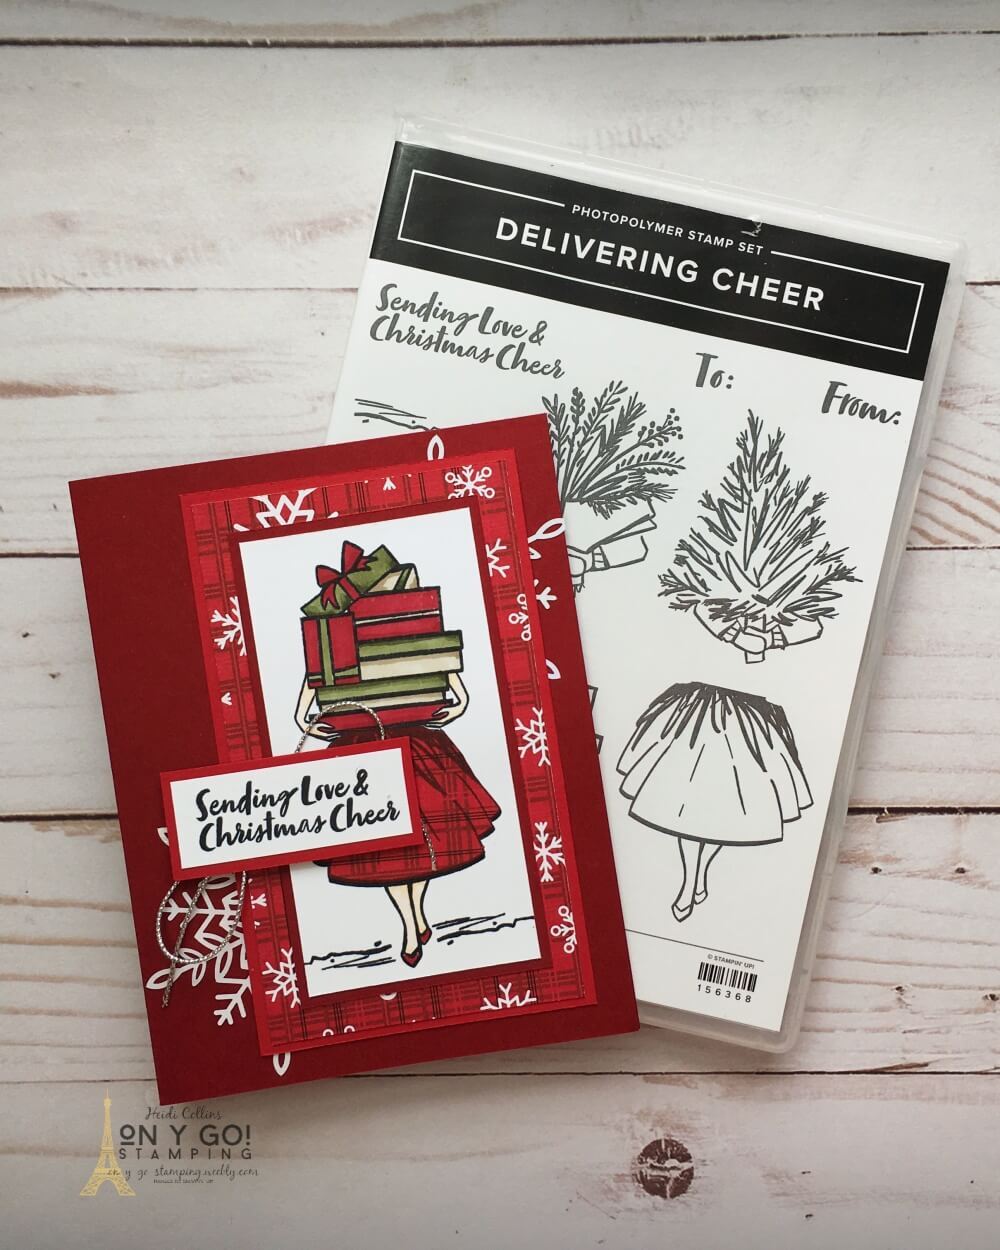 Beautiful Christmas card idea using the paper piecing card making technique and the NEW Delivering Cheer stamp set from Stampin' Up! Handmade card idea also uses the Peaceful Prints patterned paper that you can get for FREE during Fall 2021 Sale-a-Bration.